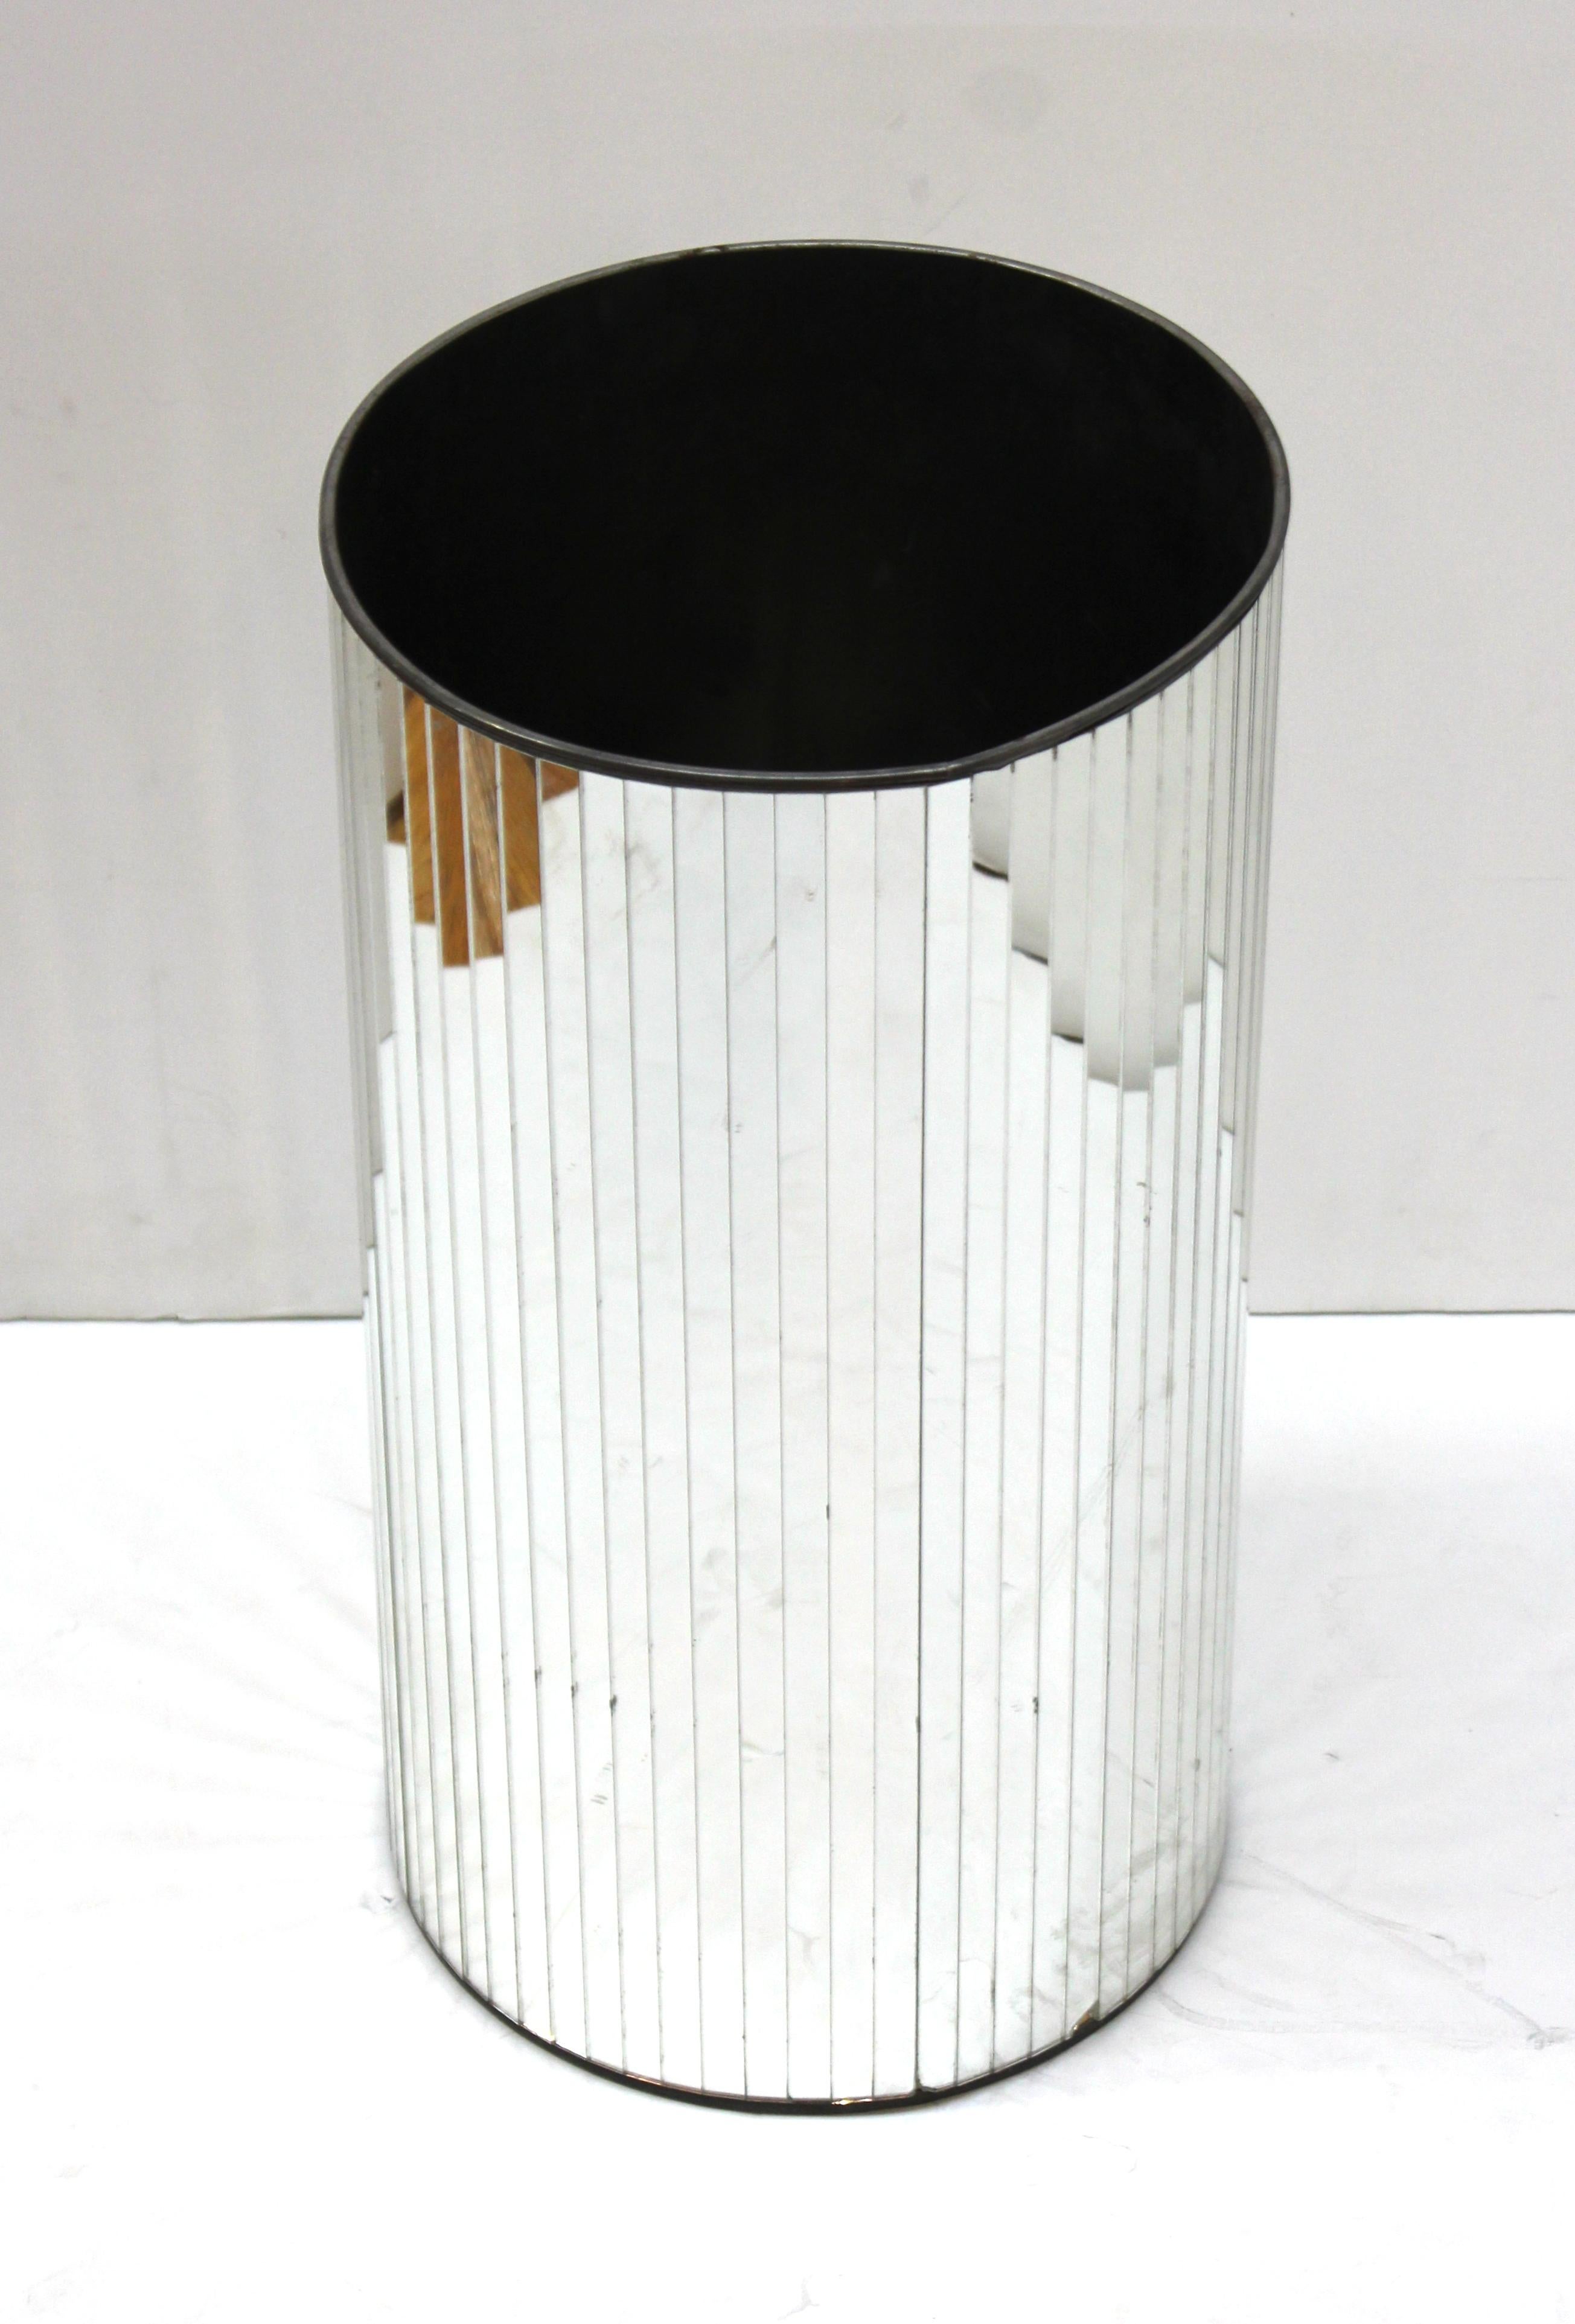 Modern cylindrical umbrella stand or dust bin with an exterior of applied faceted mirrors. The piece has an illegible makers mark on the bottom. In great vintage condition with age-appropriate wear and use.